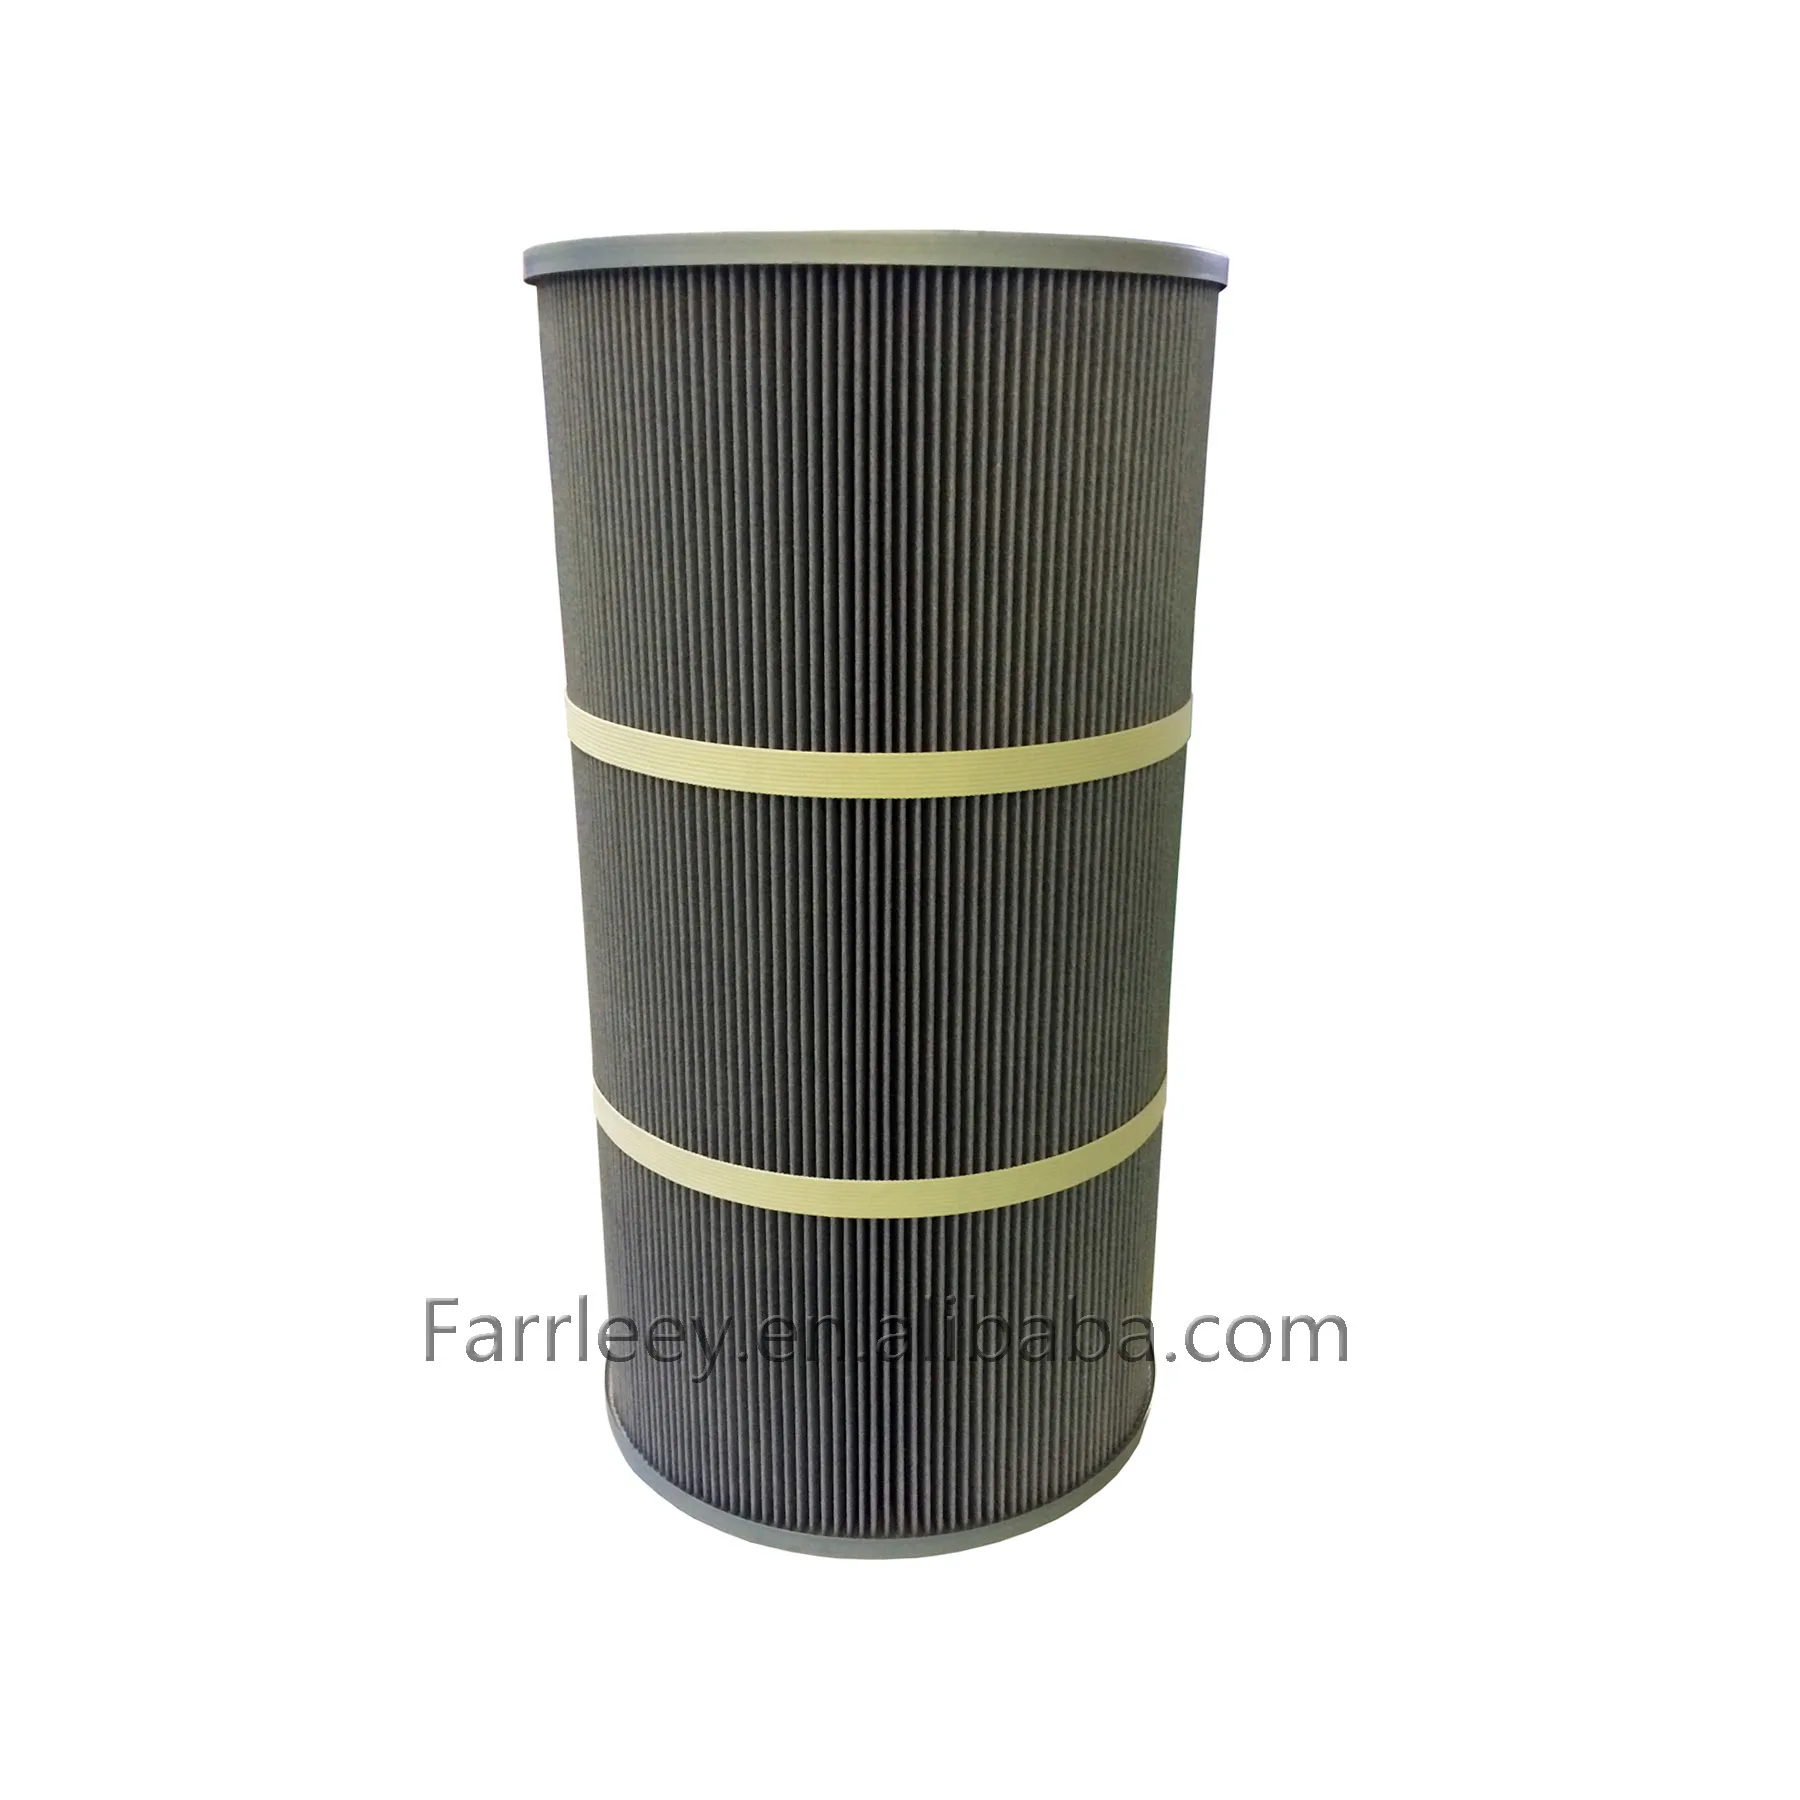 customizable Farrleey Dust Collector Antistatic Air Filter For Sand Blasting